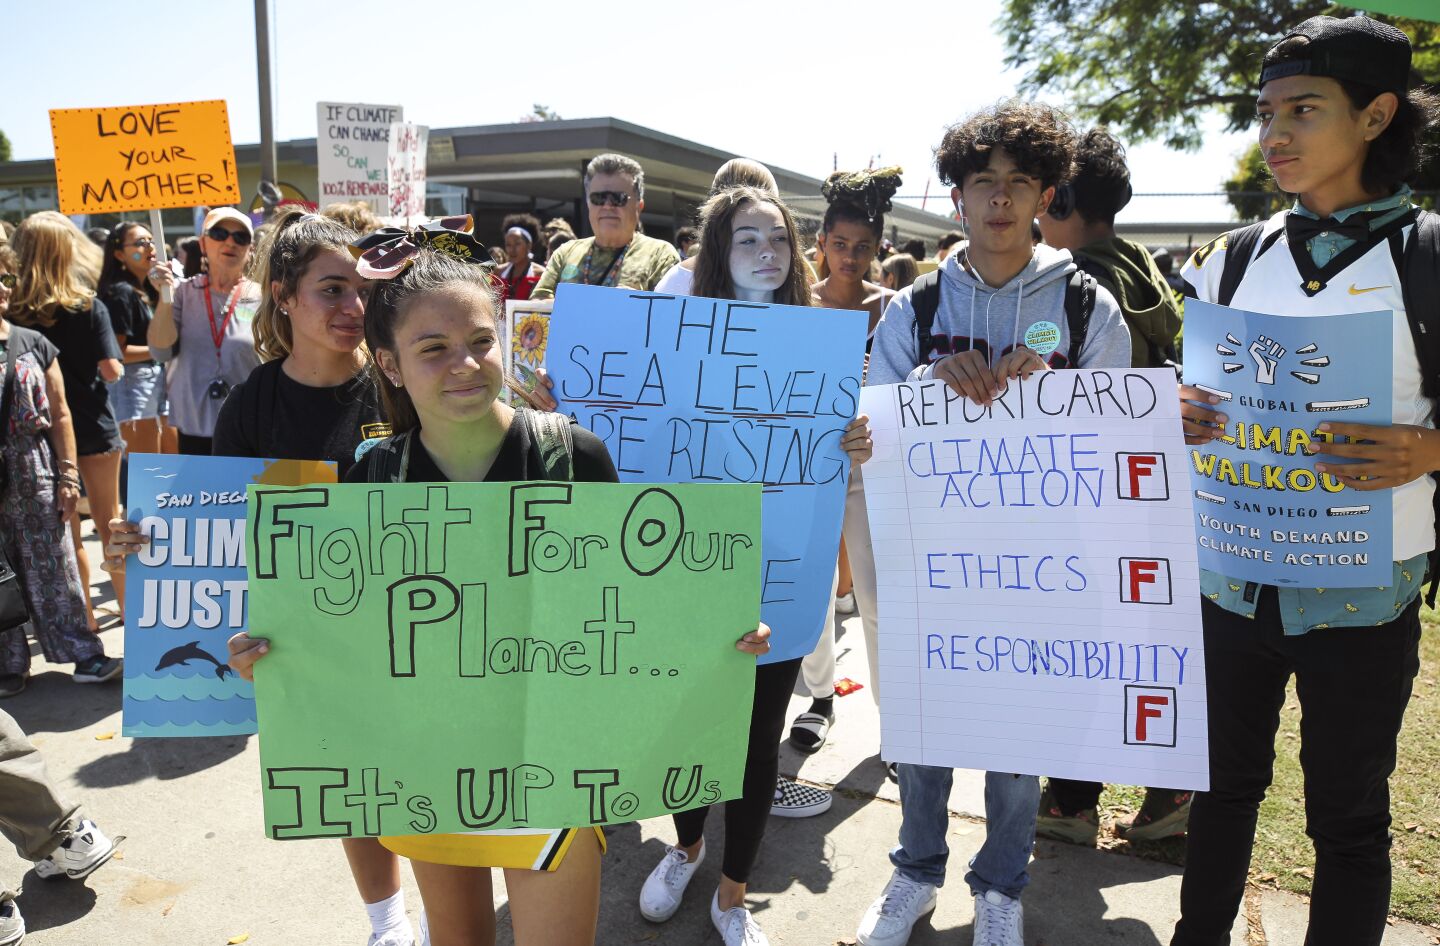 After walking out of classes, high school students participating in the Global Climate Strike gather in front of Mission Bay High School before marching to the Kendall-Frost Marsh Preserve for a rally there to demand action on the climate crisis in Pacific on Friday, September 20, 2019 in San Diego, California.